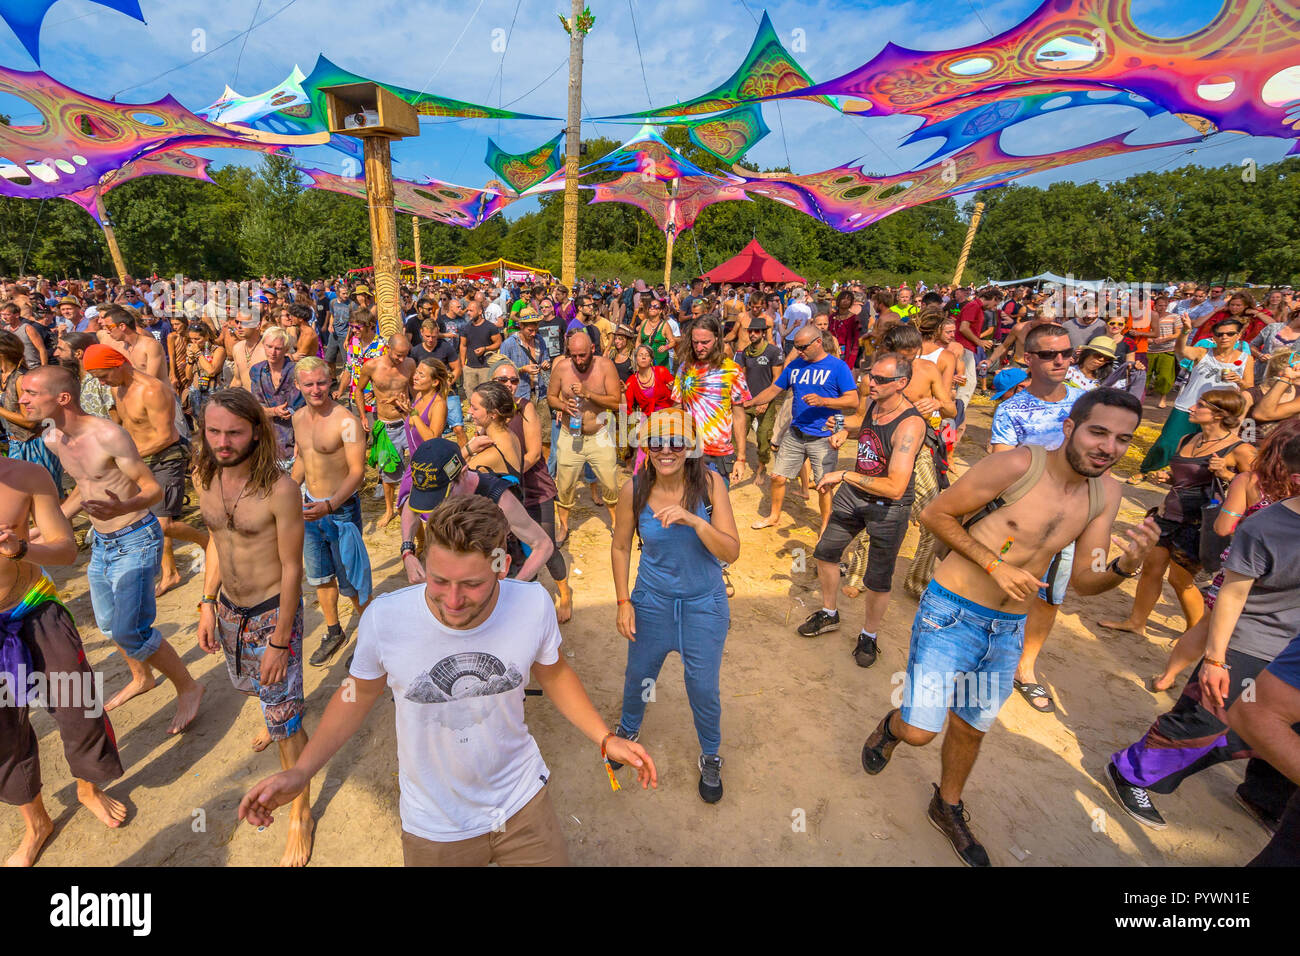 LEEUWARDEN, NETHERLANDS-AUGUST 30, 2015: Laughing happy party people having fun on the dance floor at Psy-Fi open air psychedelic trance music Festiva Stock Photo